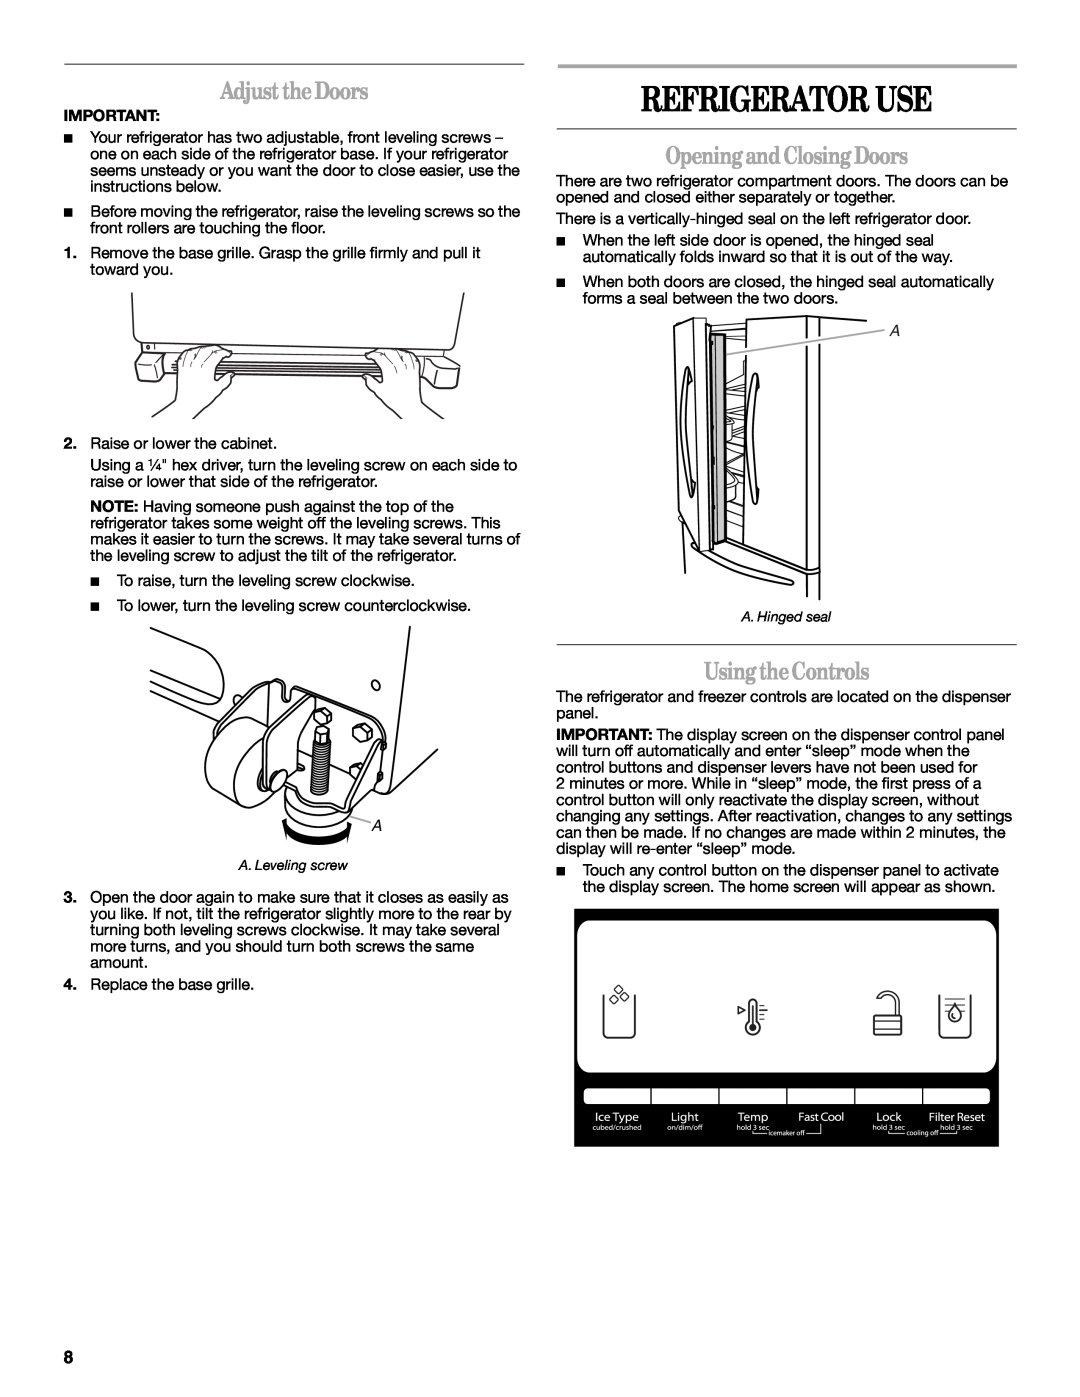 Whirlpool W10314956B Refrigerator Use, Adjust the Doors, Opening and Closing Doors, Using theControls 